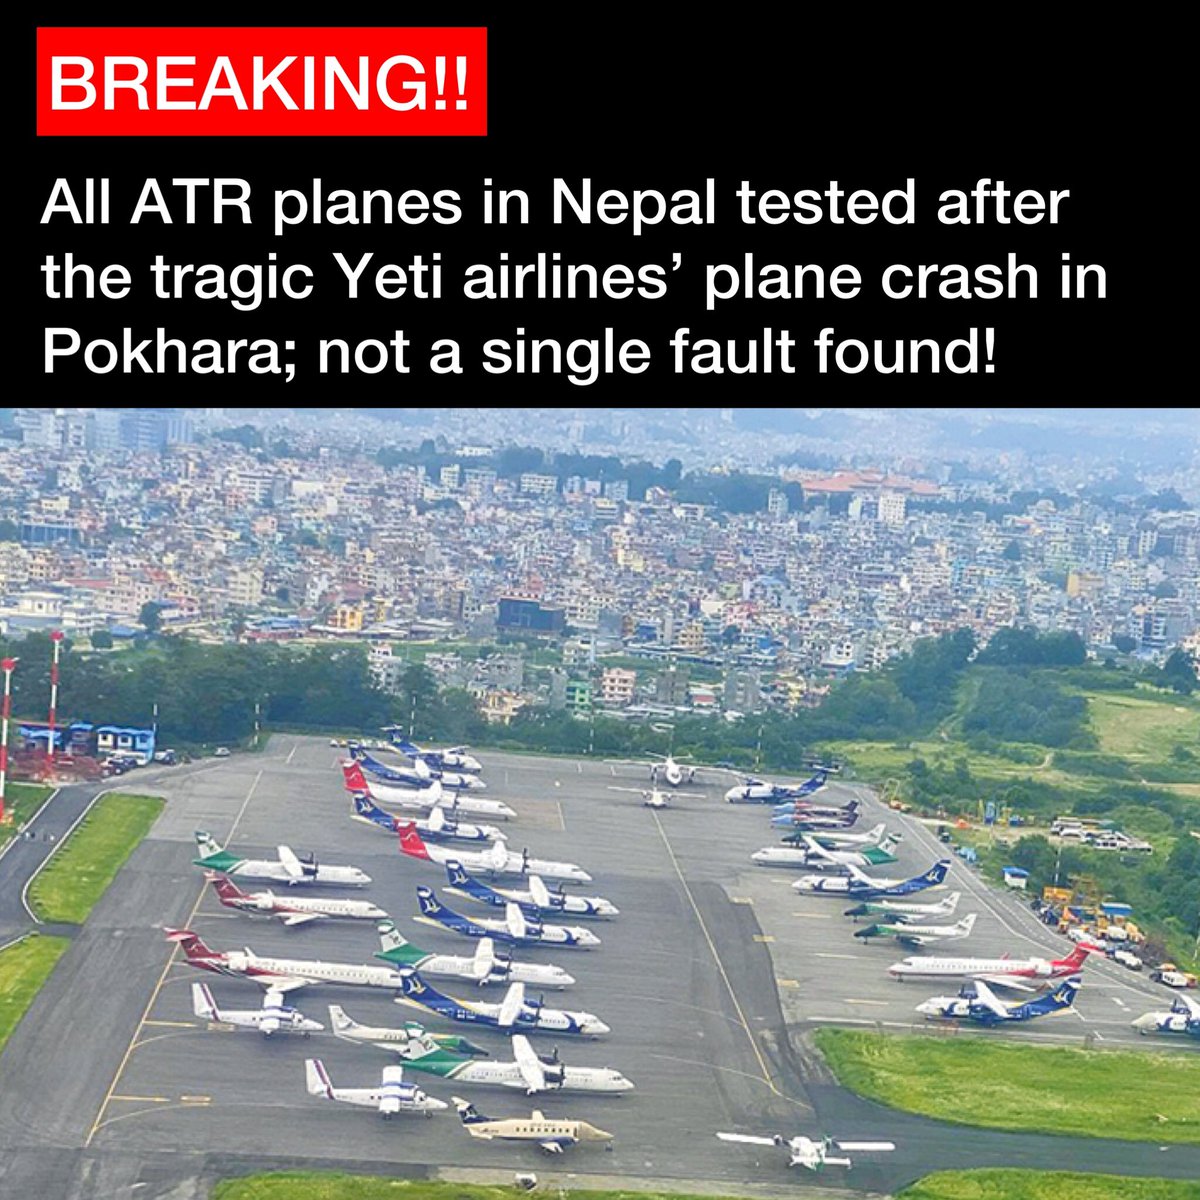 According to the Civil Aviation Authority of Nepal, all ATR aircraft flying in Nepal were detailedly checked after the tragic plane crash of Yeti Airlines on Sunday. However, no single fault was found in any of the airplanes from the tests conducted. Thoughts? #yetiairlines